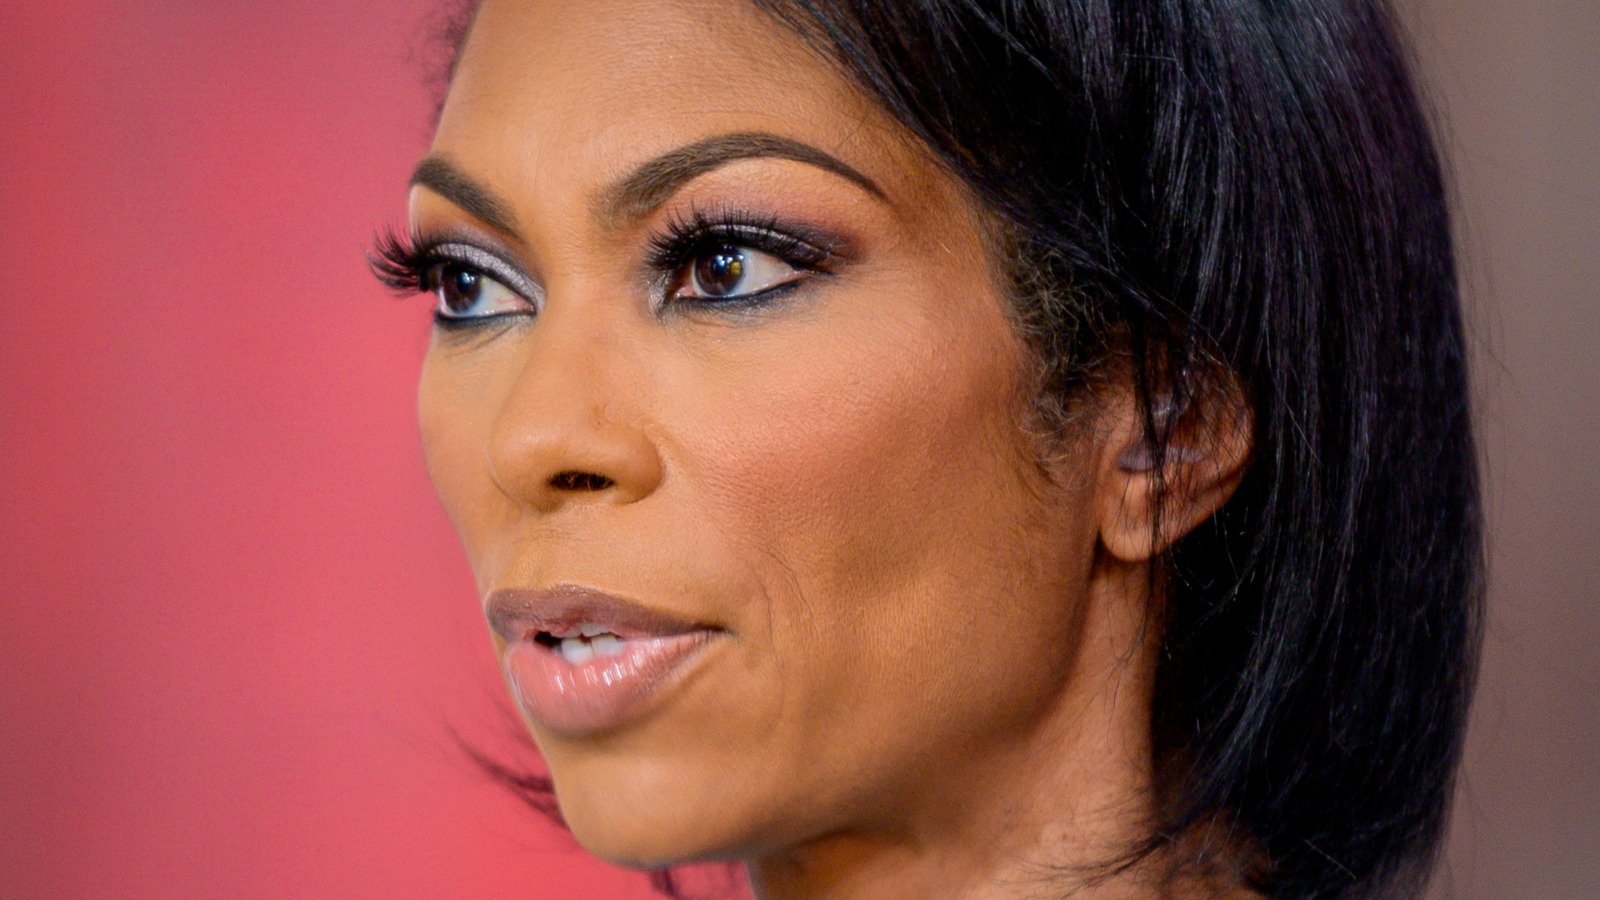 What Most People Don't Know About Fox News Anchor Harris Faulkner - Nicki Swift